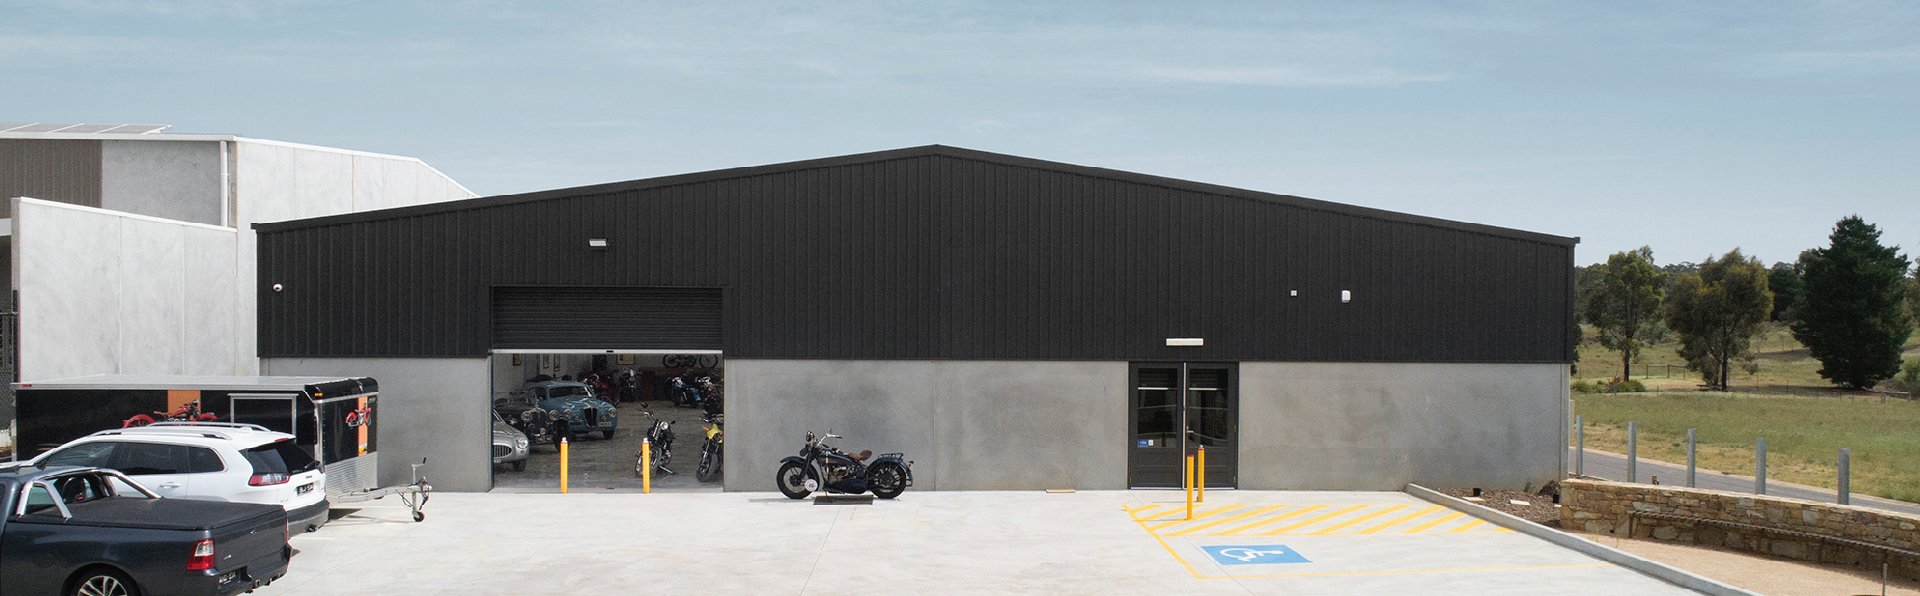 Harley City Collection industrial warehouse